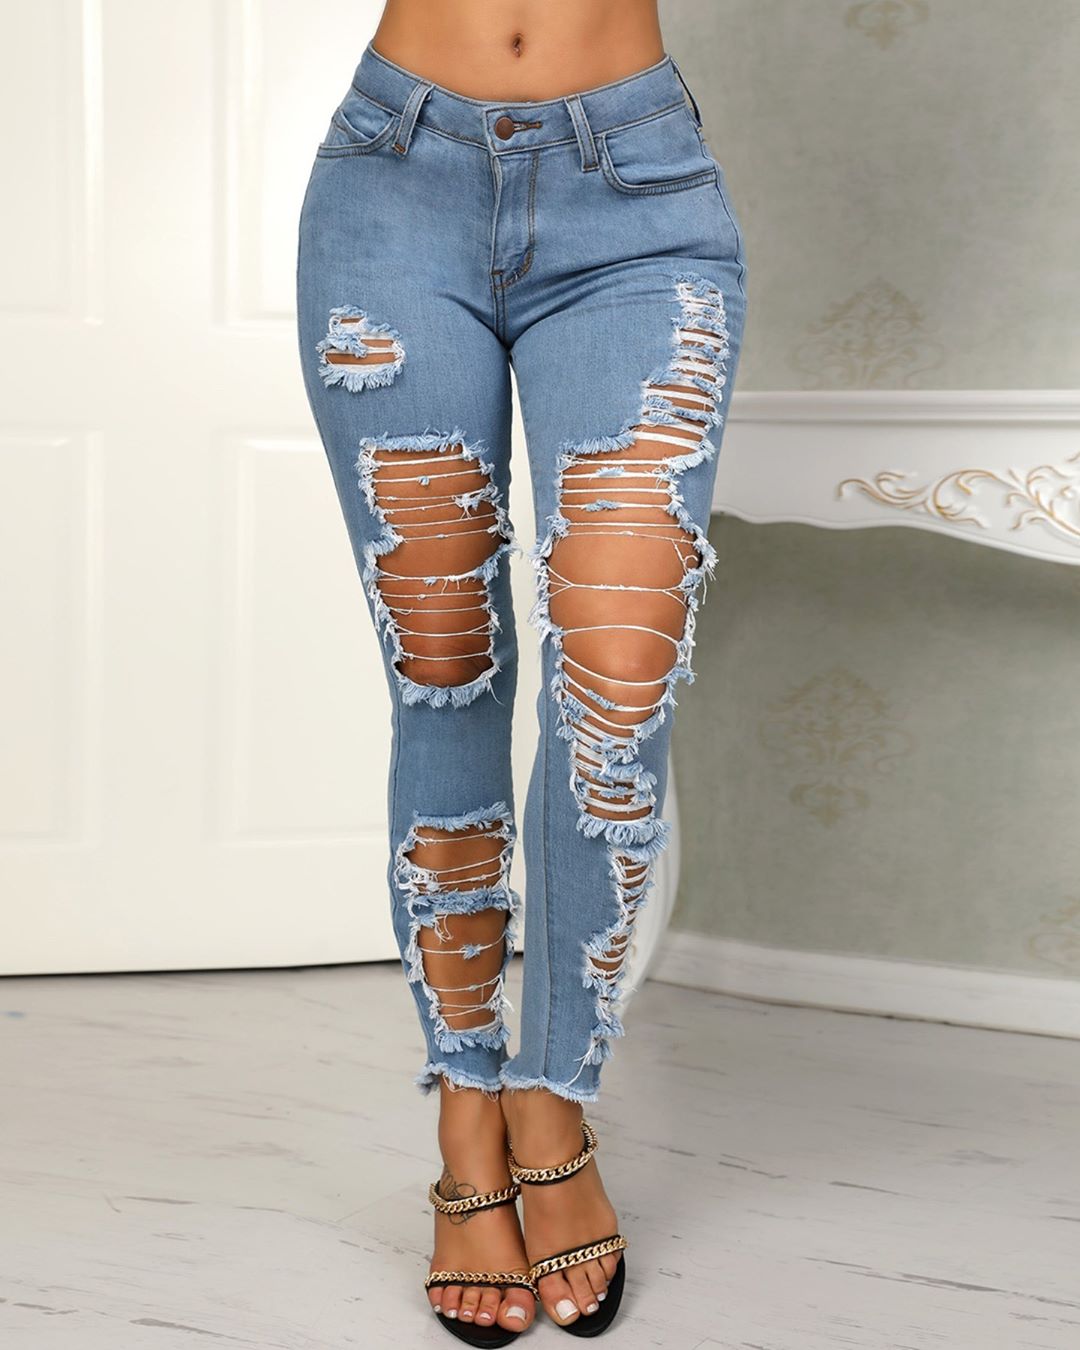 ivroseofficial - #linkinbio The only thing better than great denim is more of it.⁠
🔍"LZG1152"⁠
Shop: IVROSE.com⁠
⁠
#ivroseofficial #fashion #style #ootd #outfitgoals #ootdshare #sale